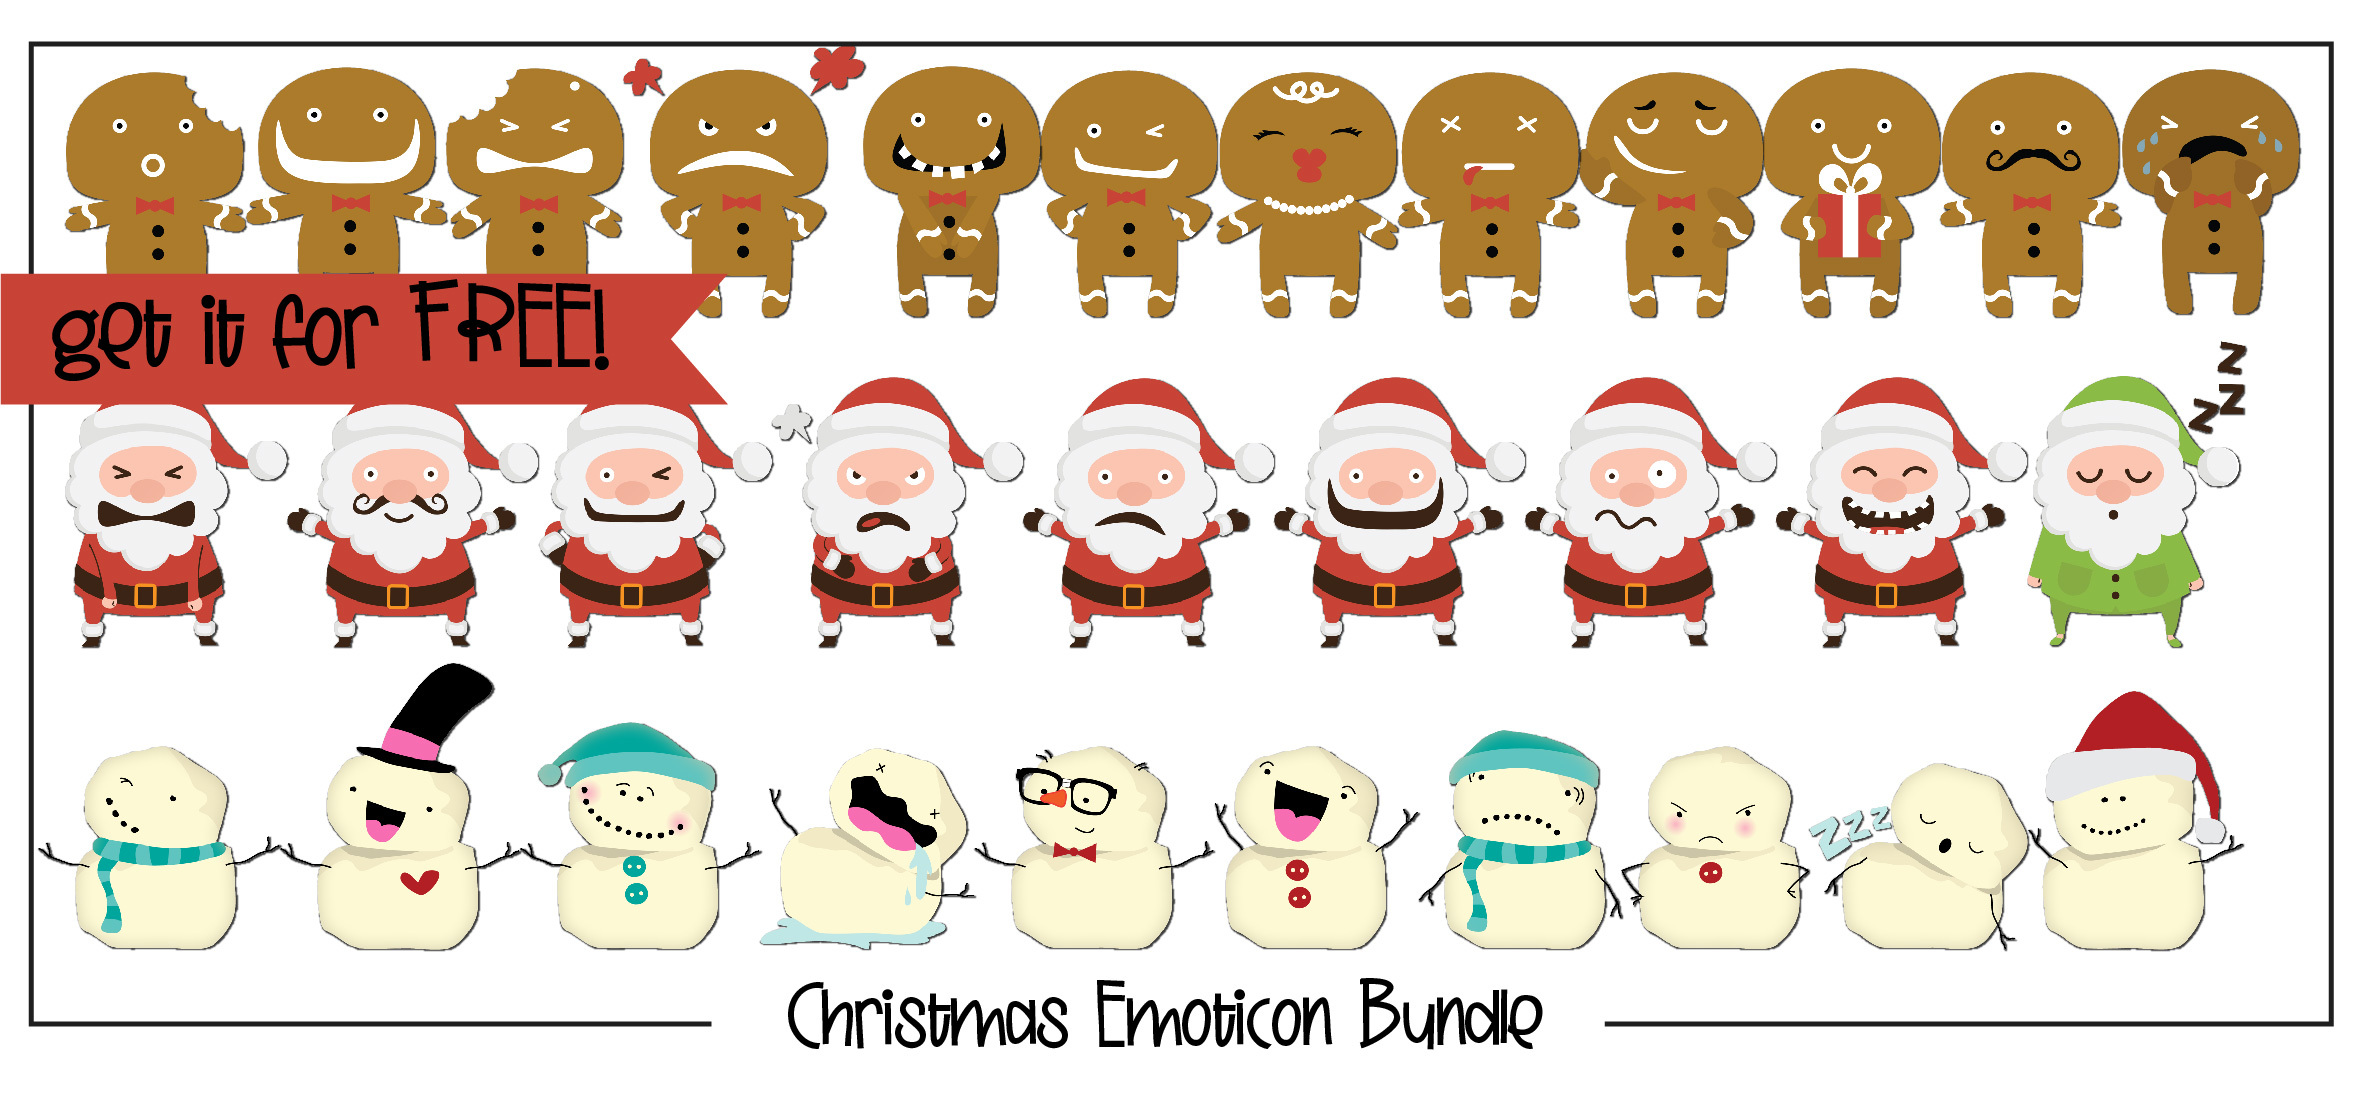 Earn the Christmas Emoticon - Promotional Bundle - Free